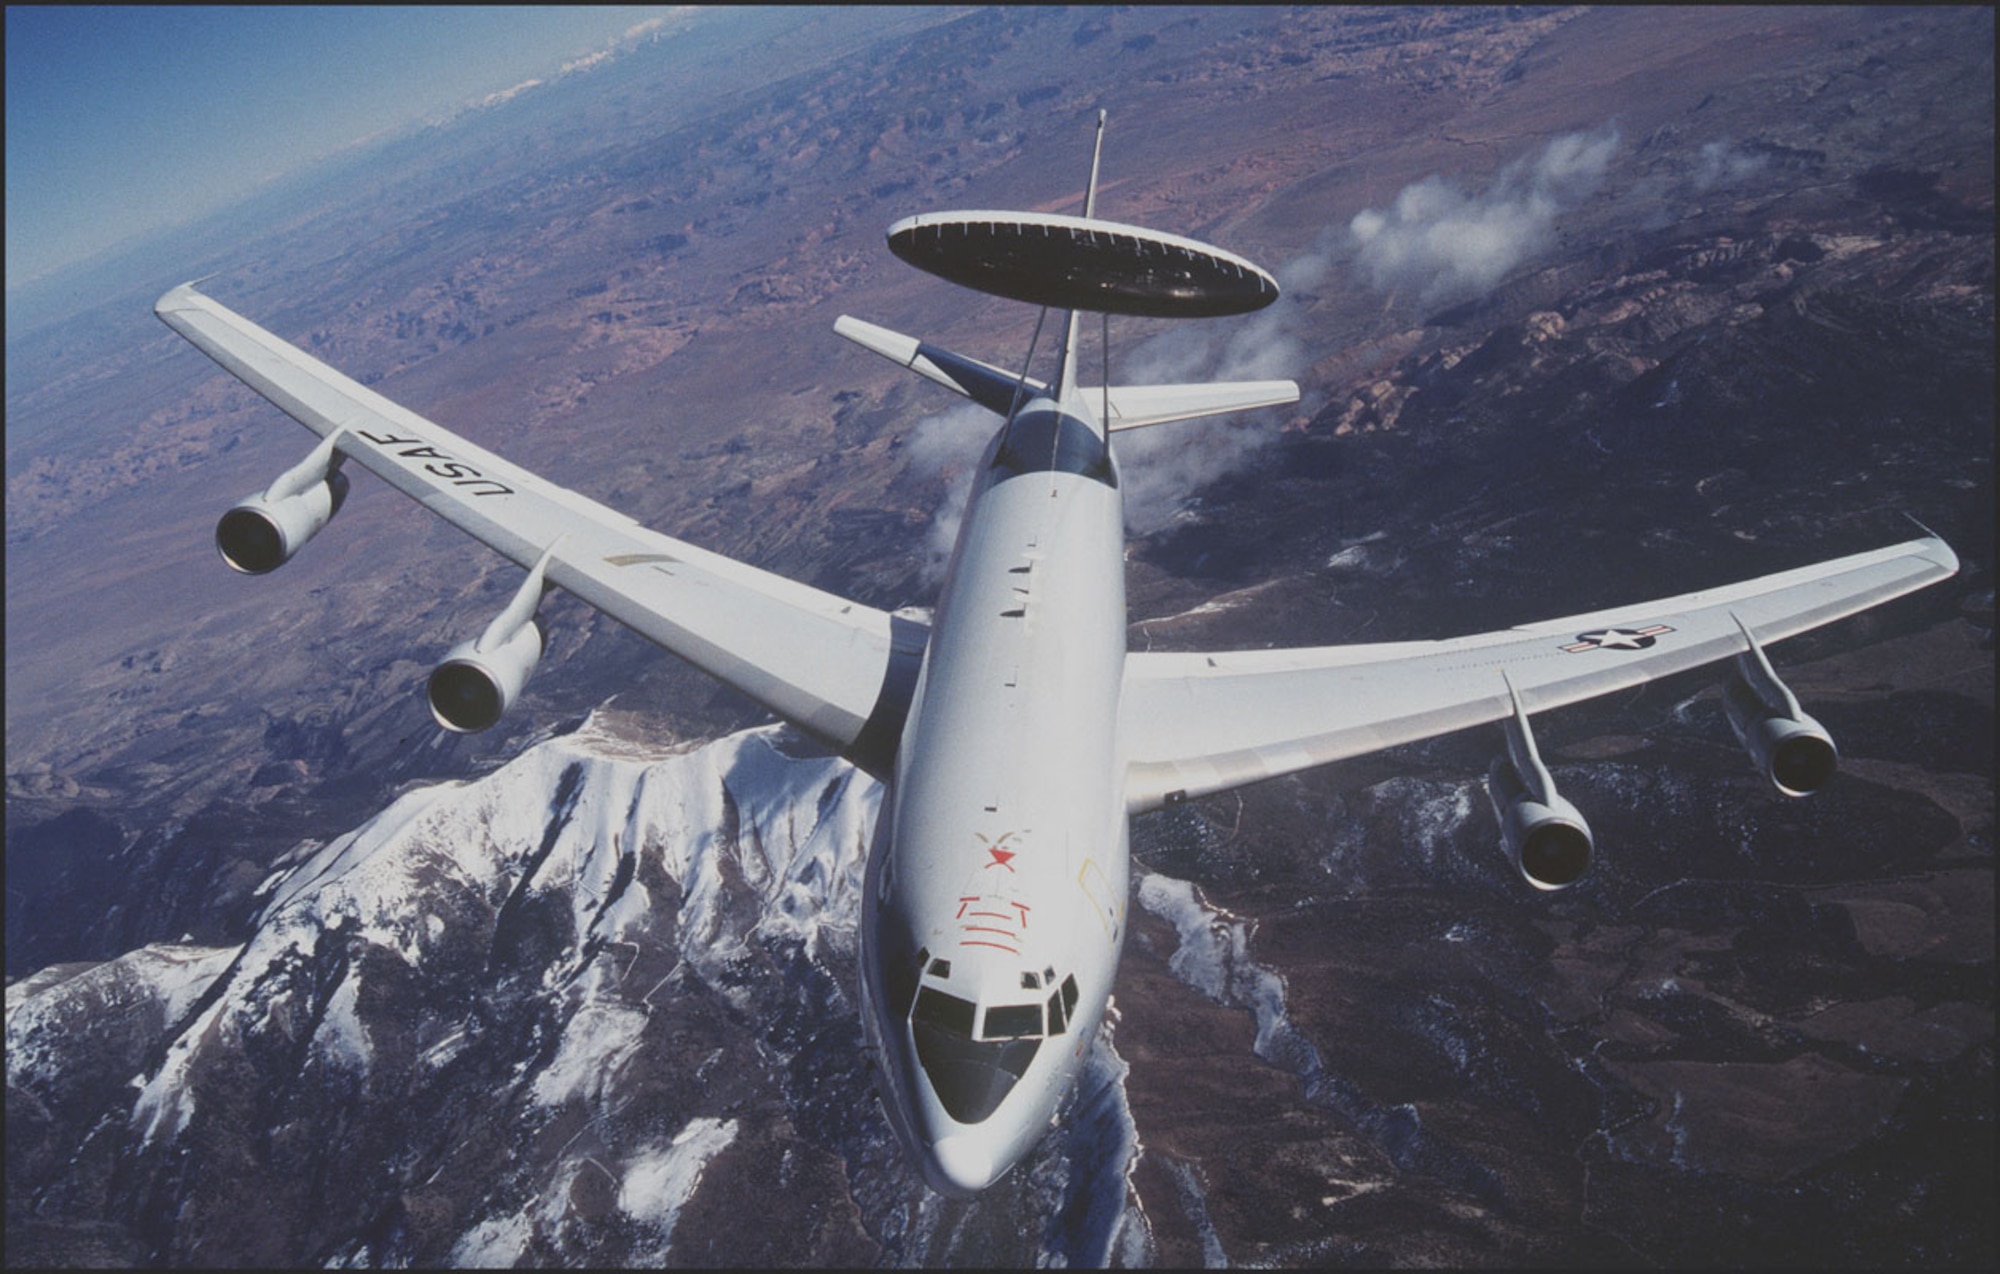 FILE PHOTO -- The E-3 Sentry is a modified Boeing 707/320 commercial airframe with a rotating radar dome. The dome is 30 feet in diameter, 6 feet thick and is held 11 feet above the fuselage by two struts. It contains a radar subsystem that permits surveillance from the Earth's surface up into the stratosphere, over land or water. The radar has a range of more than 200 miles for low-flying targets and farther for aerospace vehicles flying at medium to high altitudes. (Courtesy photo)